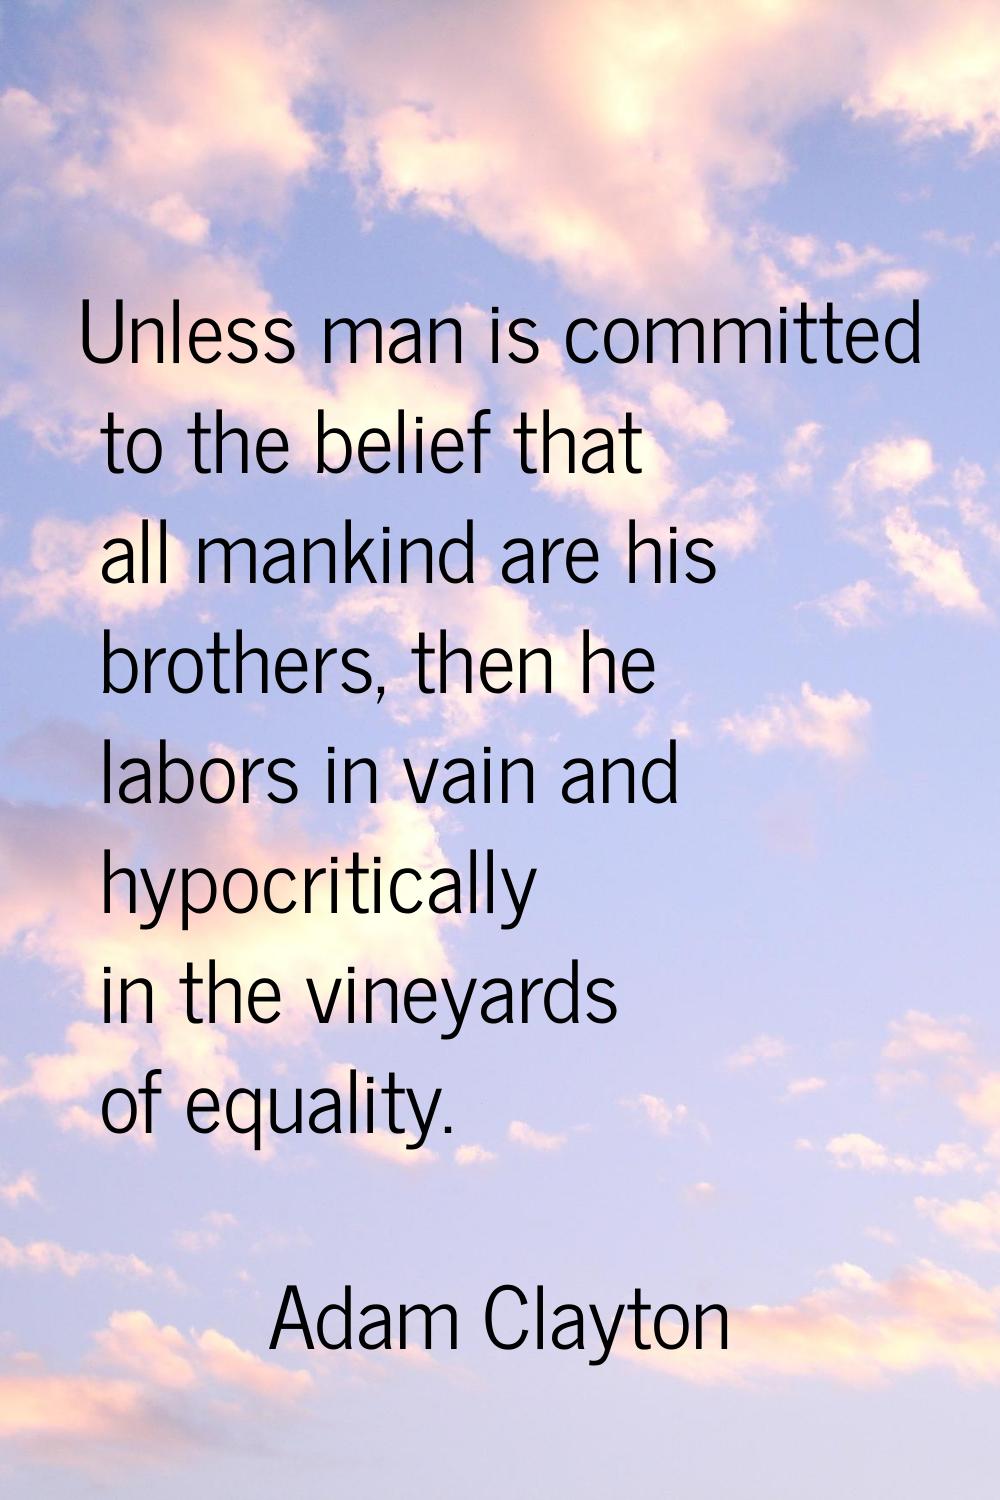 Unless man is committed to the belief that all mankind are his brothers, then he labors in vain and